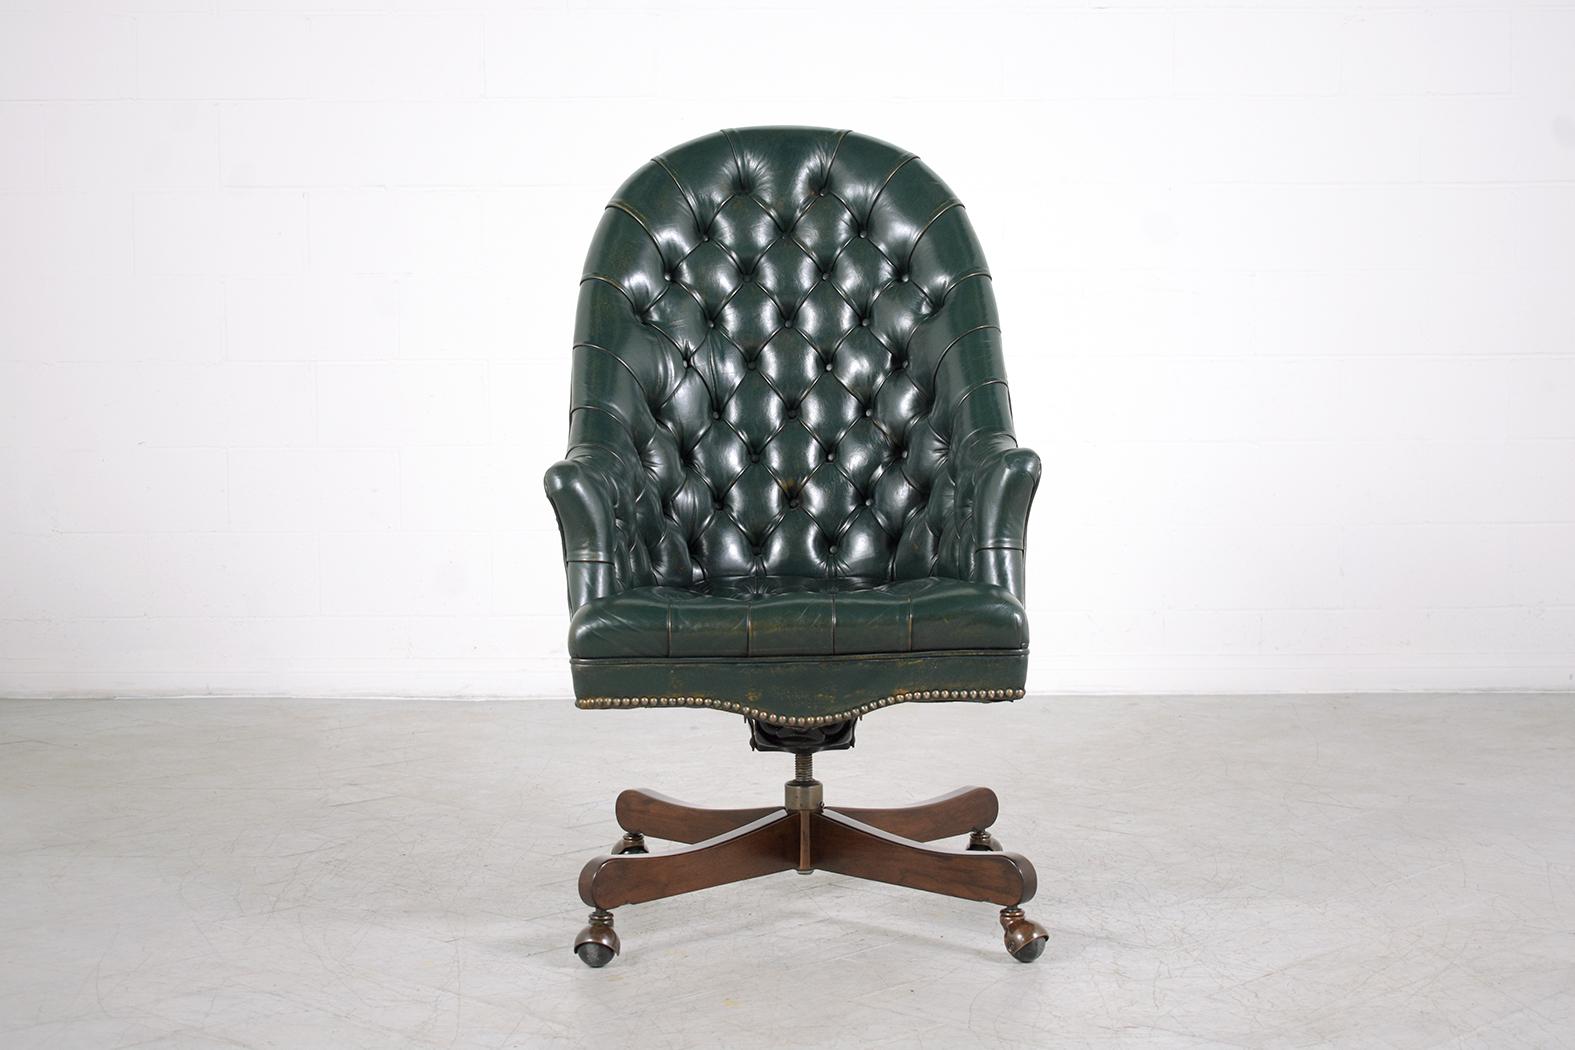 This vintage leather chesterfield swivel office chair is in good condition completely restored by our professional craftsmen team. In this executive office armchair, the frame is hand-crafted out of solid wood and leather combination and this sleek